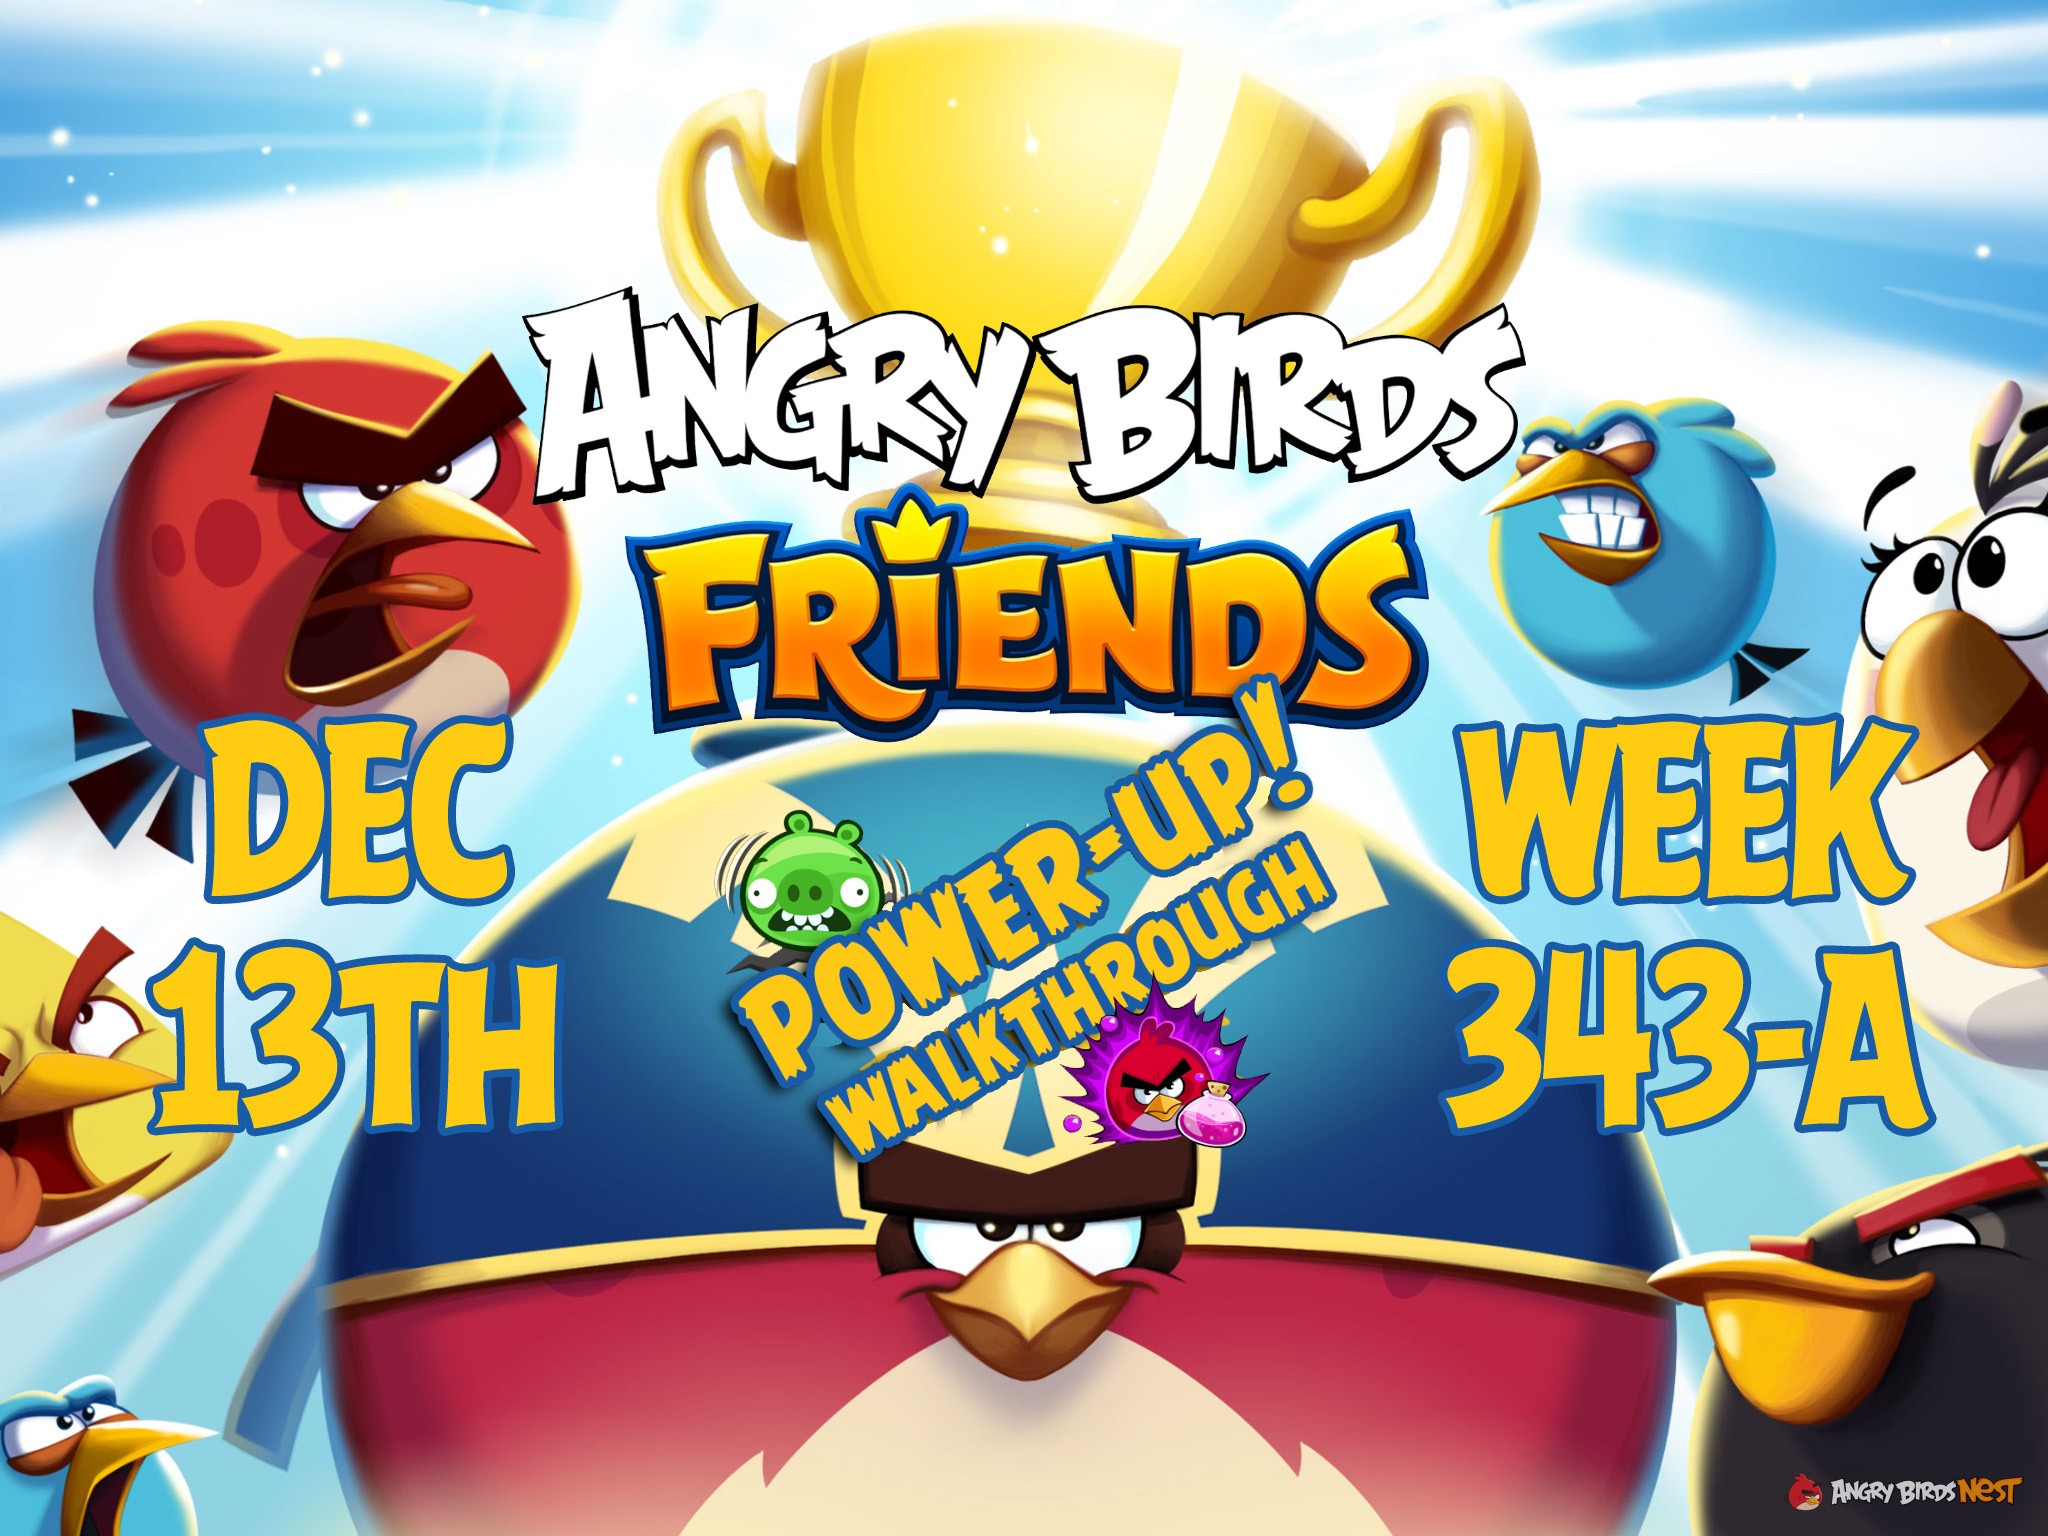 Angry-Birds-Friends-Tournament-Week-343-A-Feature-Image-PU